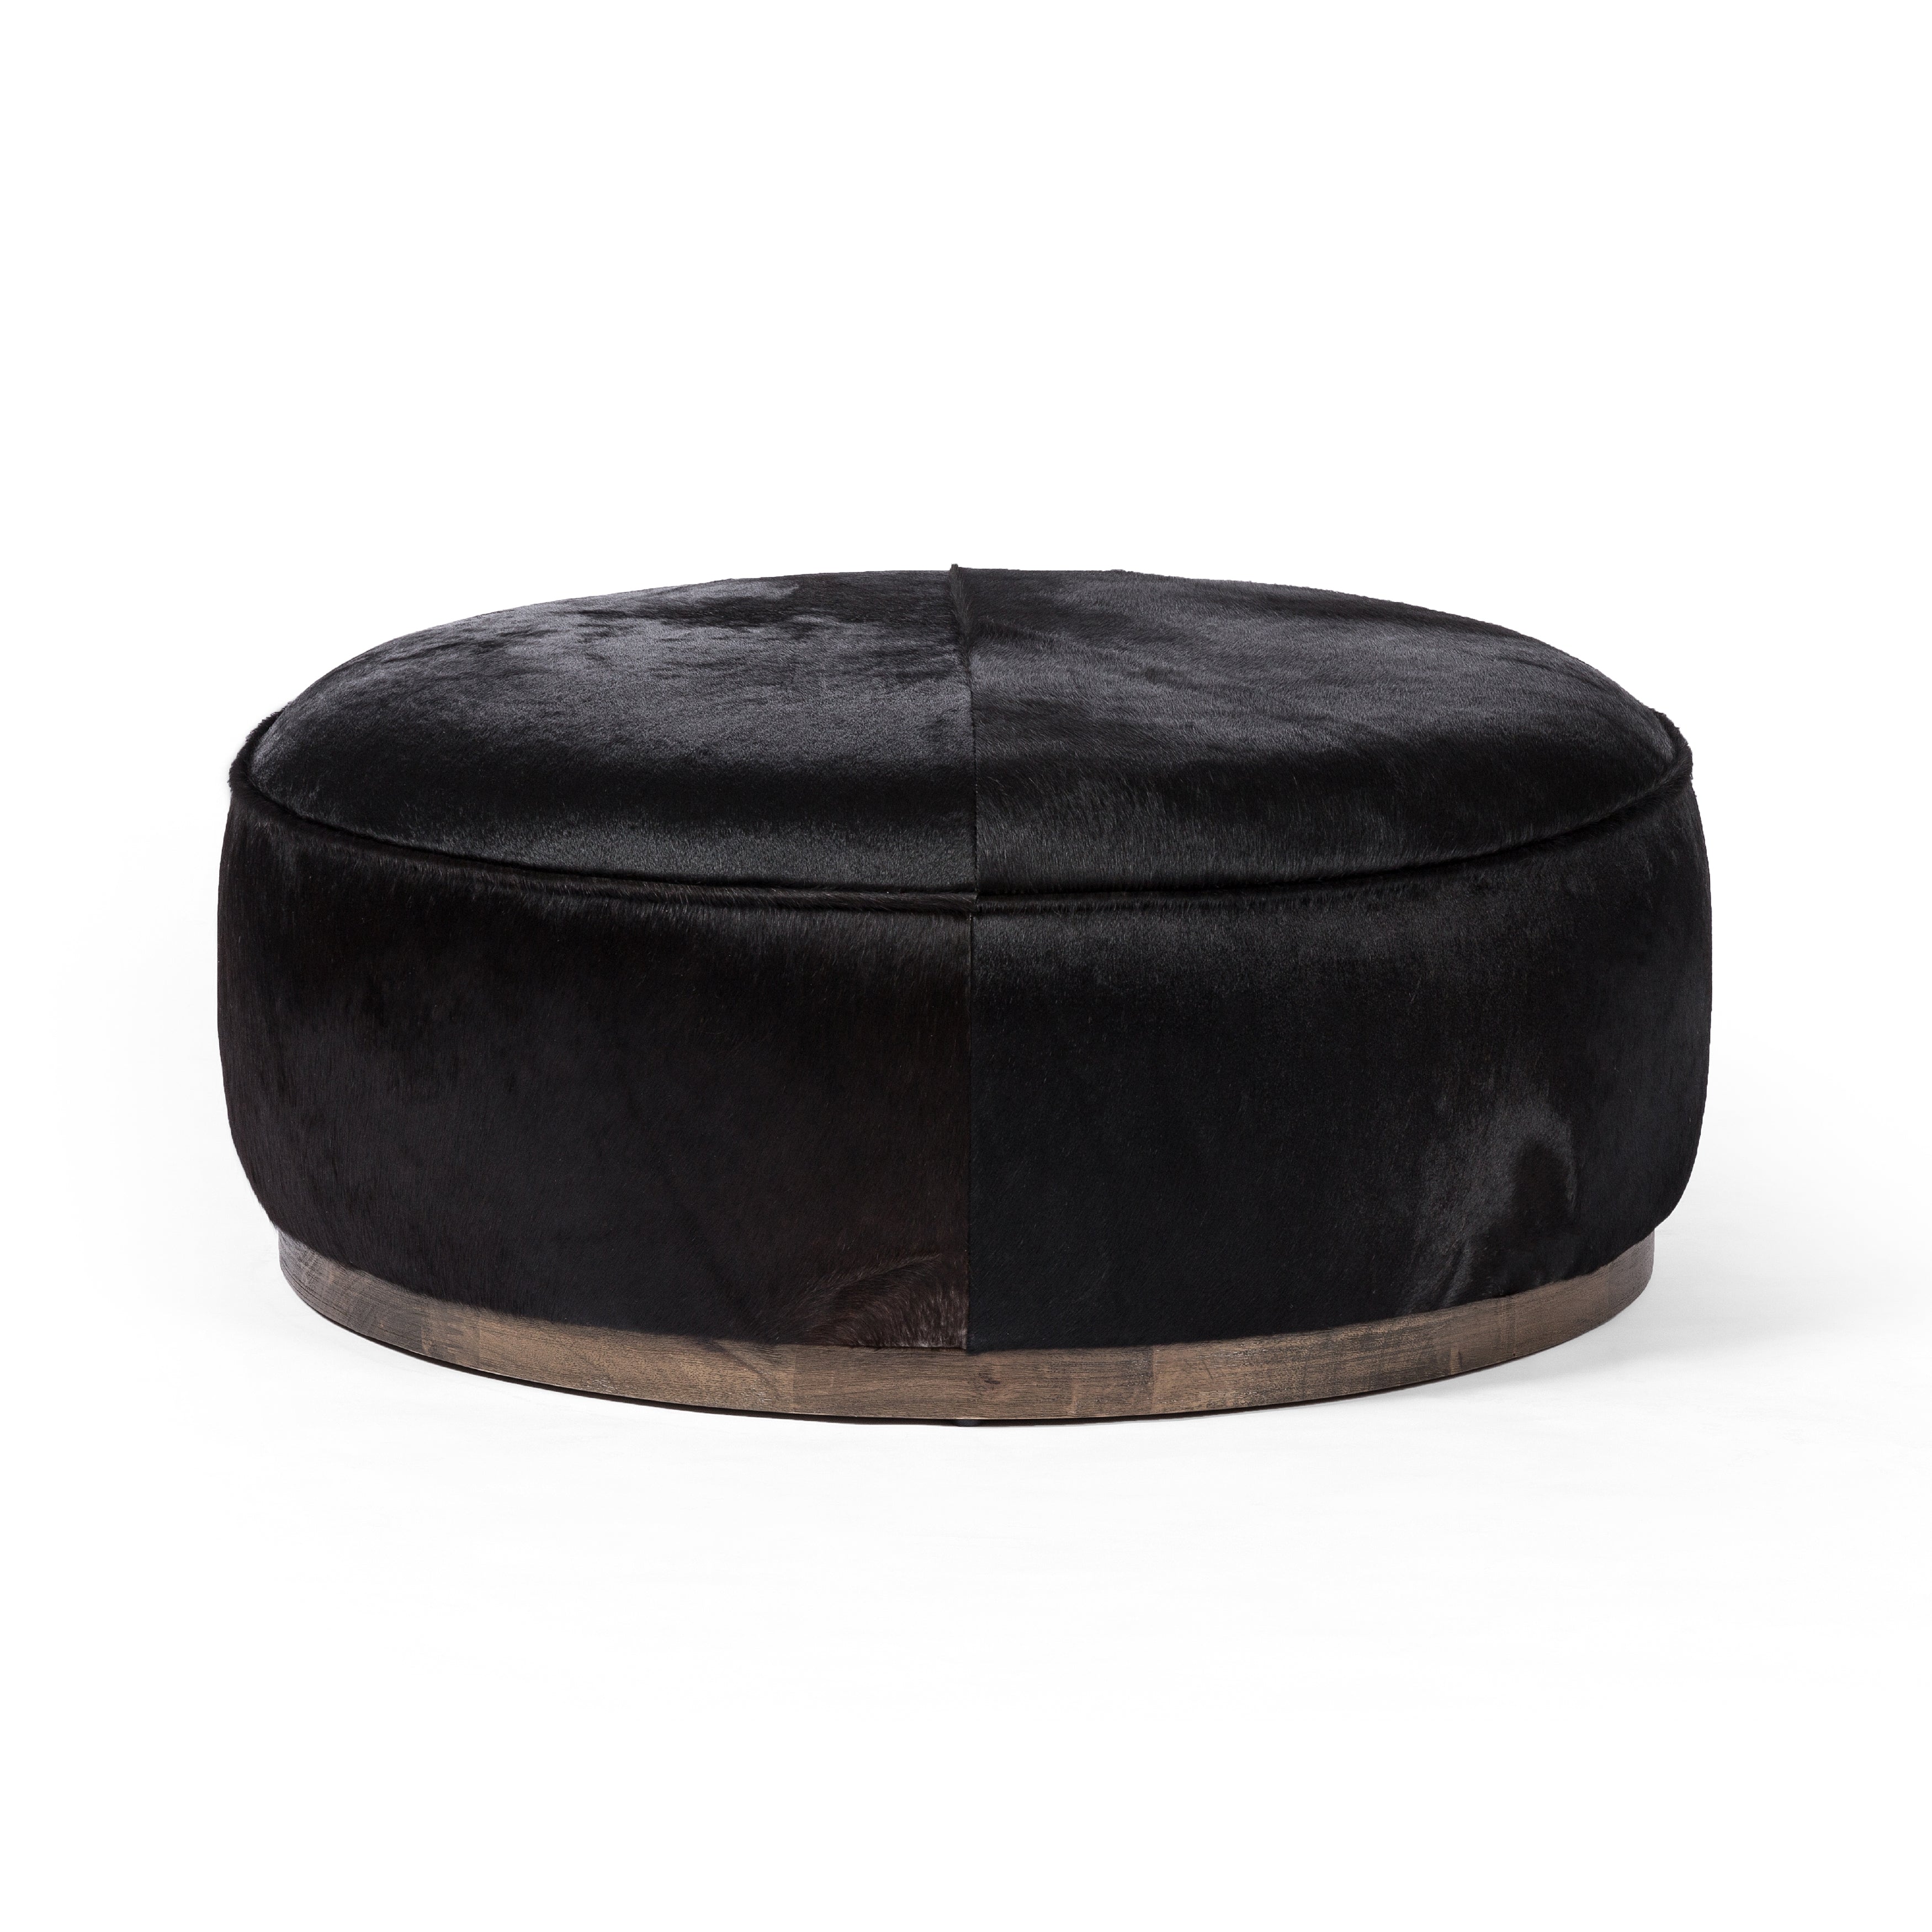 This large, round ottoman of textural hair-on hide brings with it a hip retro vibe as a coffee table or extra seating.  Covered in soft and luminous black hair-on hide, which is naturally warm and textural with authentic highlights. Amethyst Home provides interior design, new construction, custom furniture, and area rugs in the Newport Beach metro area.